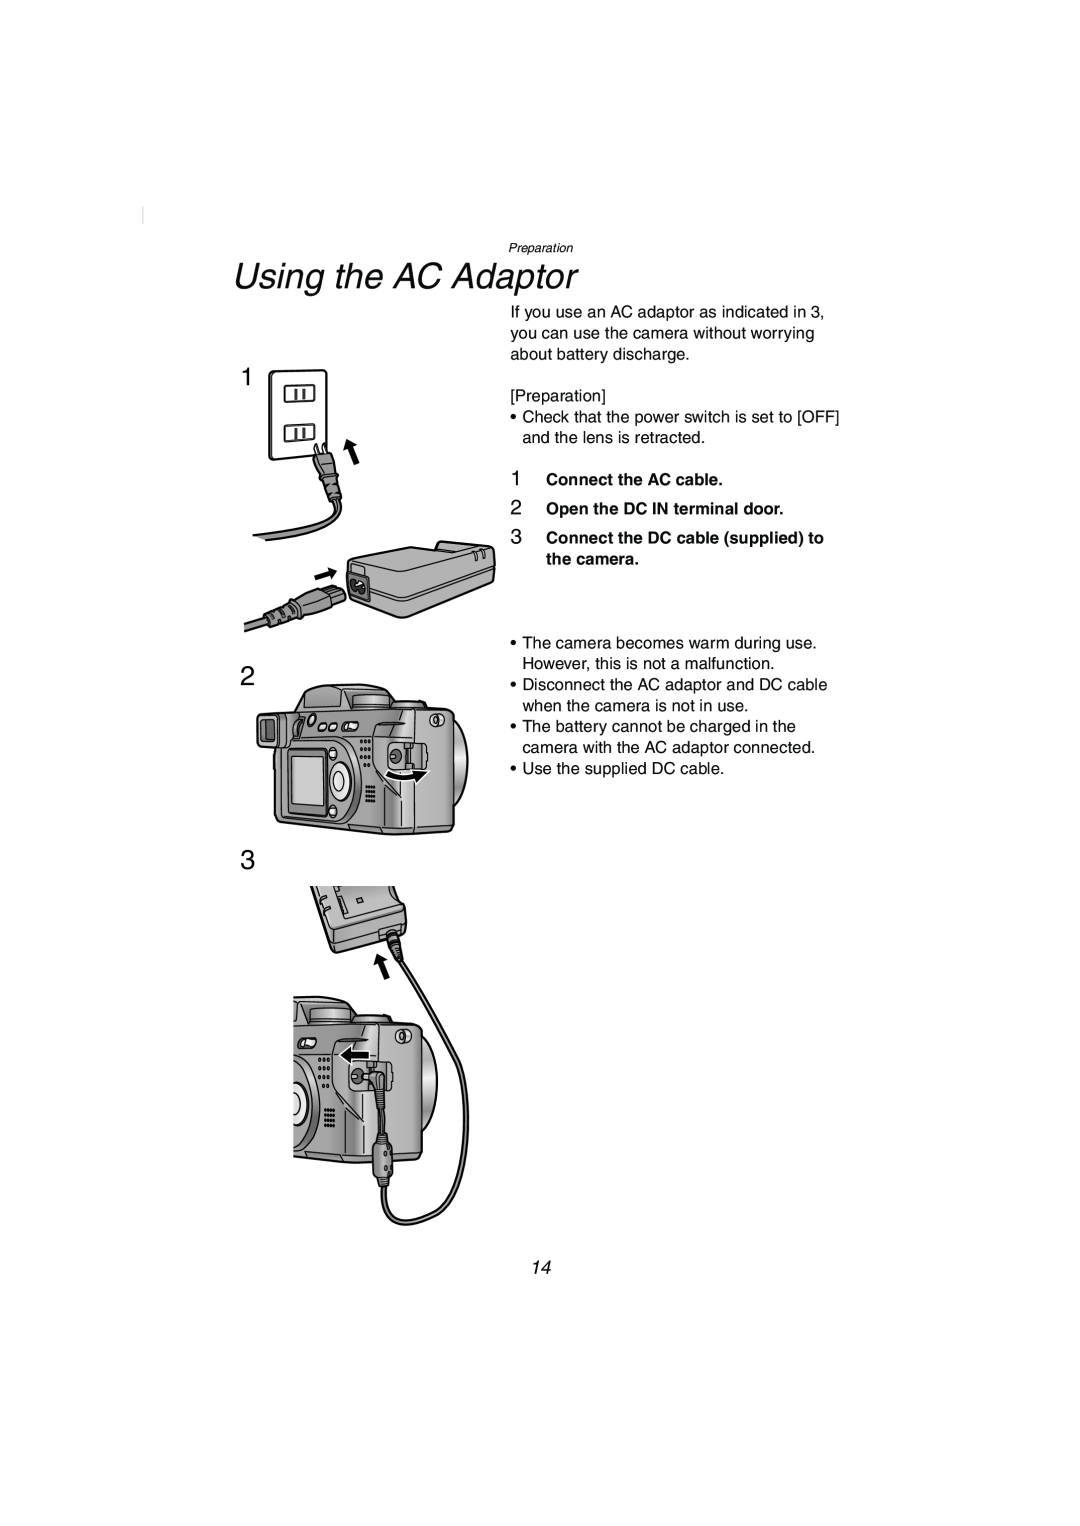 Panasonic DMC-FZ2PP operating instructions Using the AC Adaptor, Connect the AC cable 2 Open the DC IN terminal door 